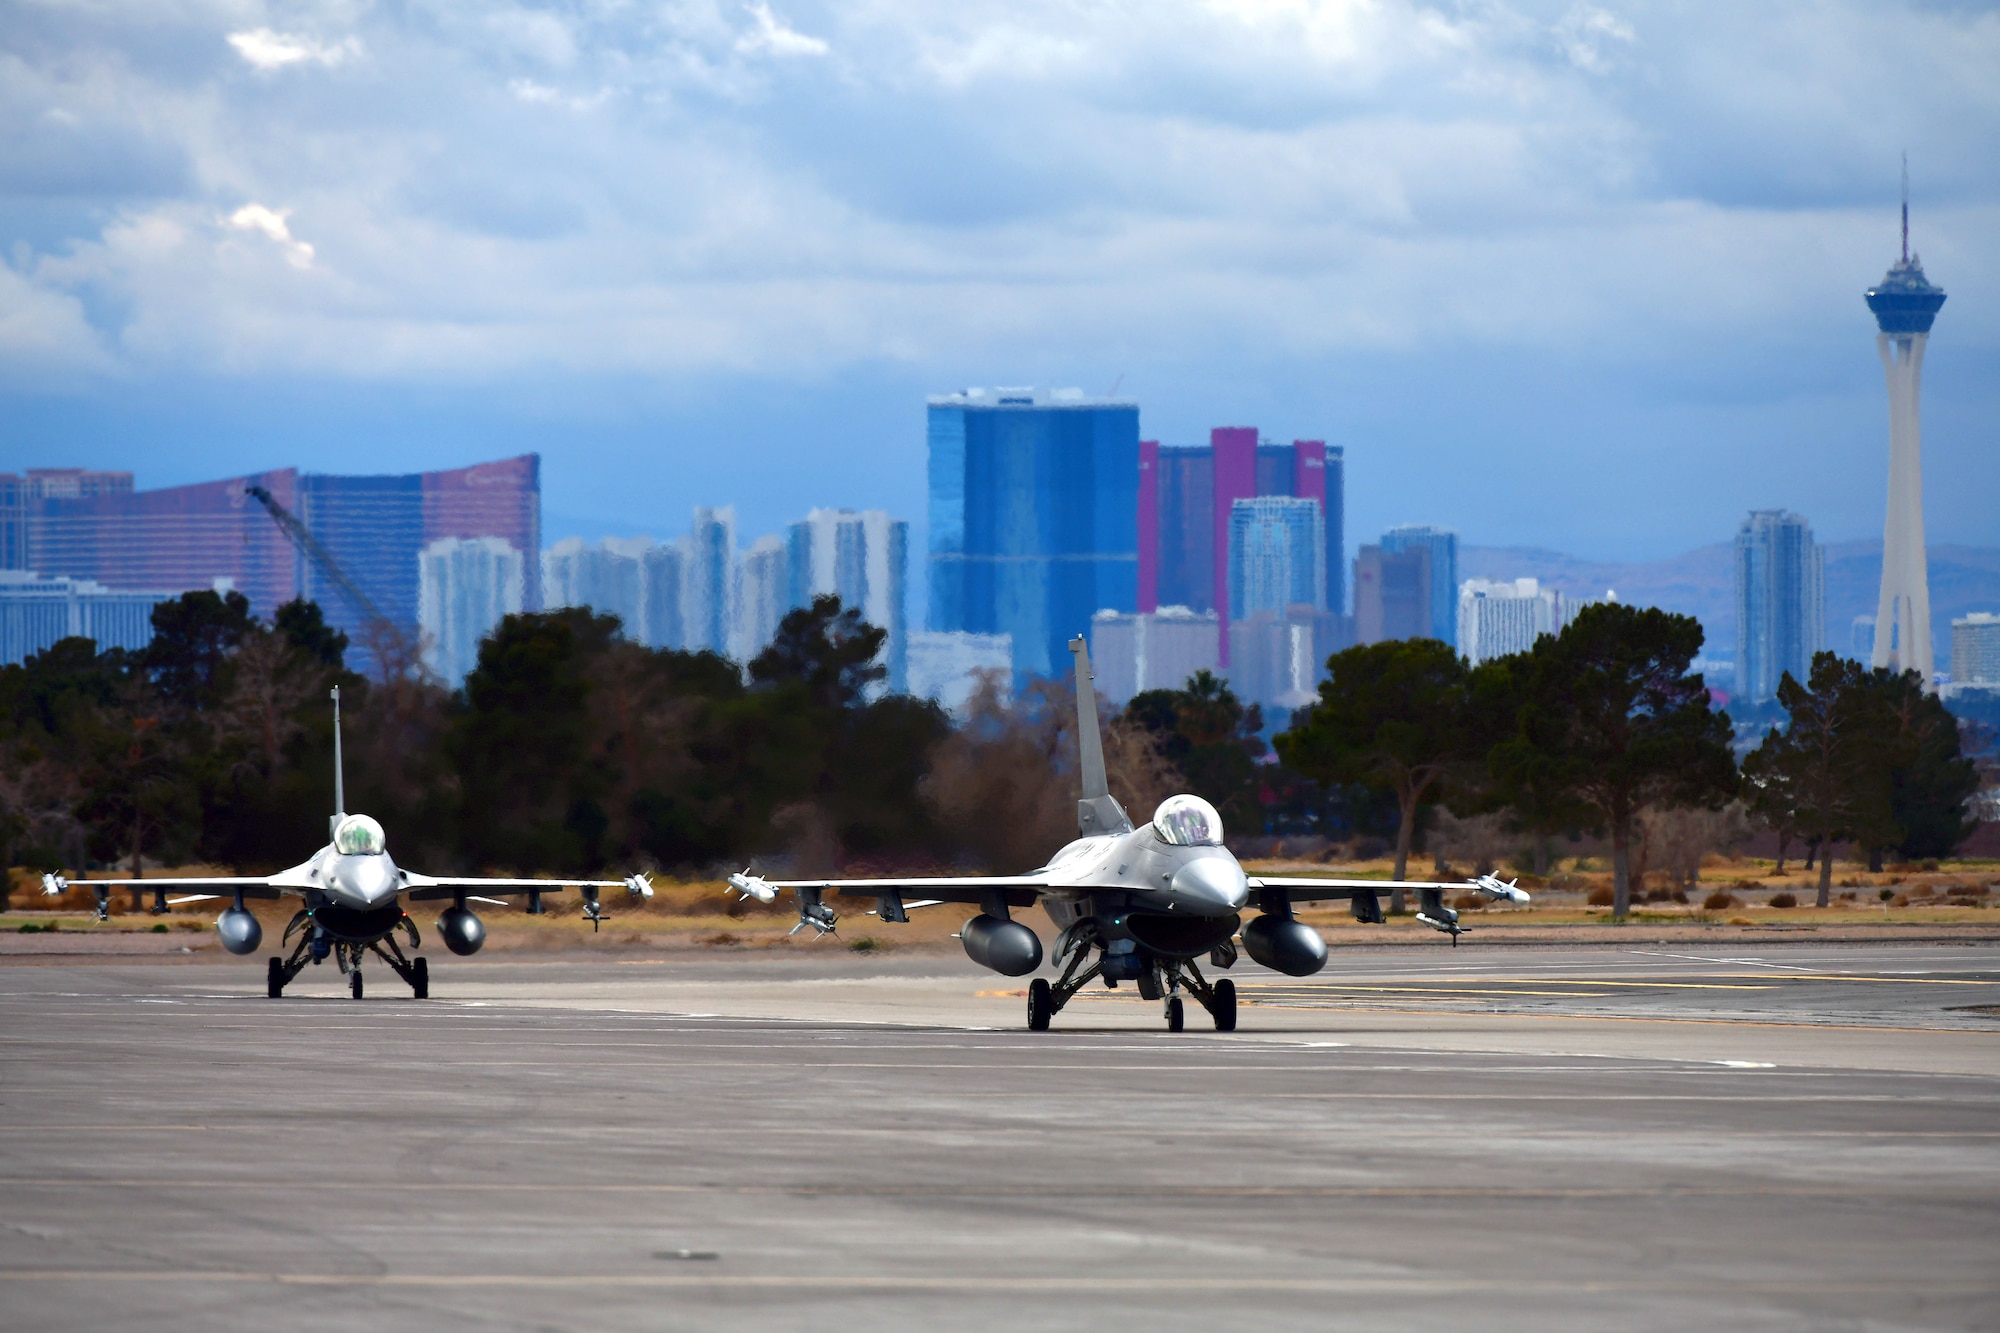 2 jets on runway with las vegas strip in background